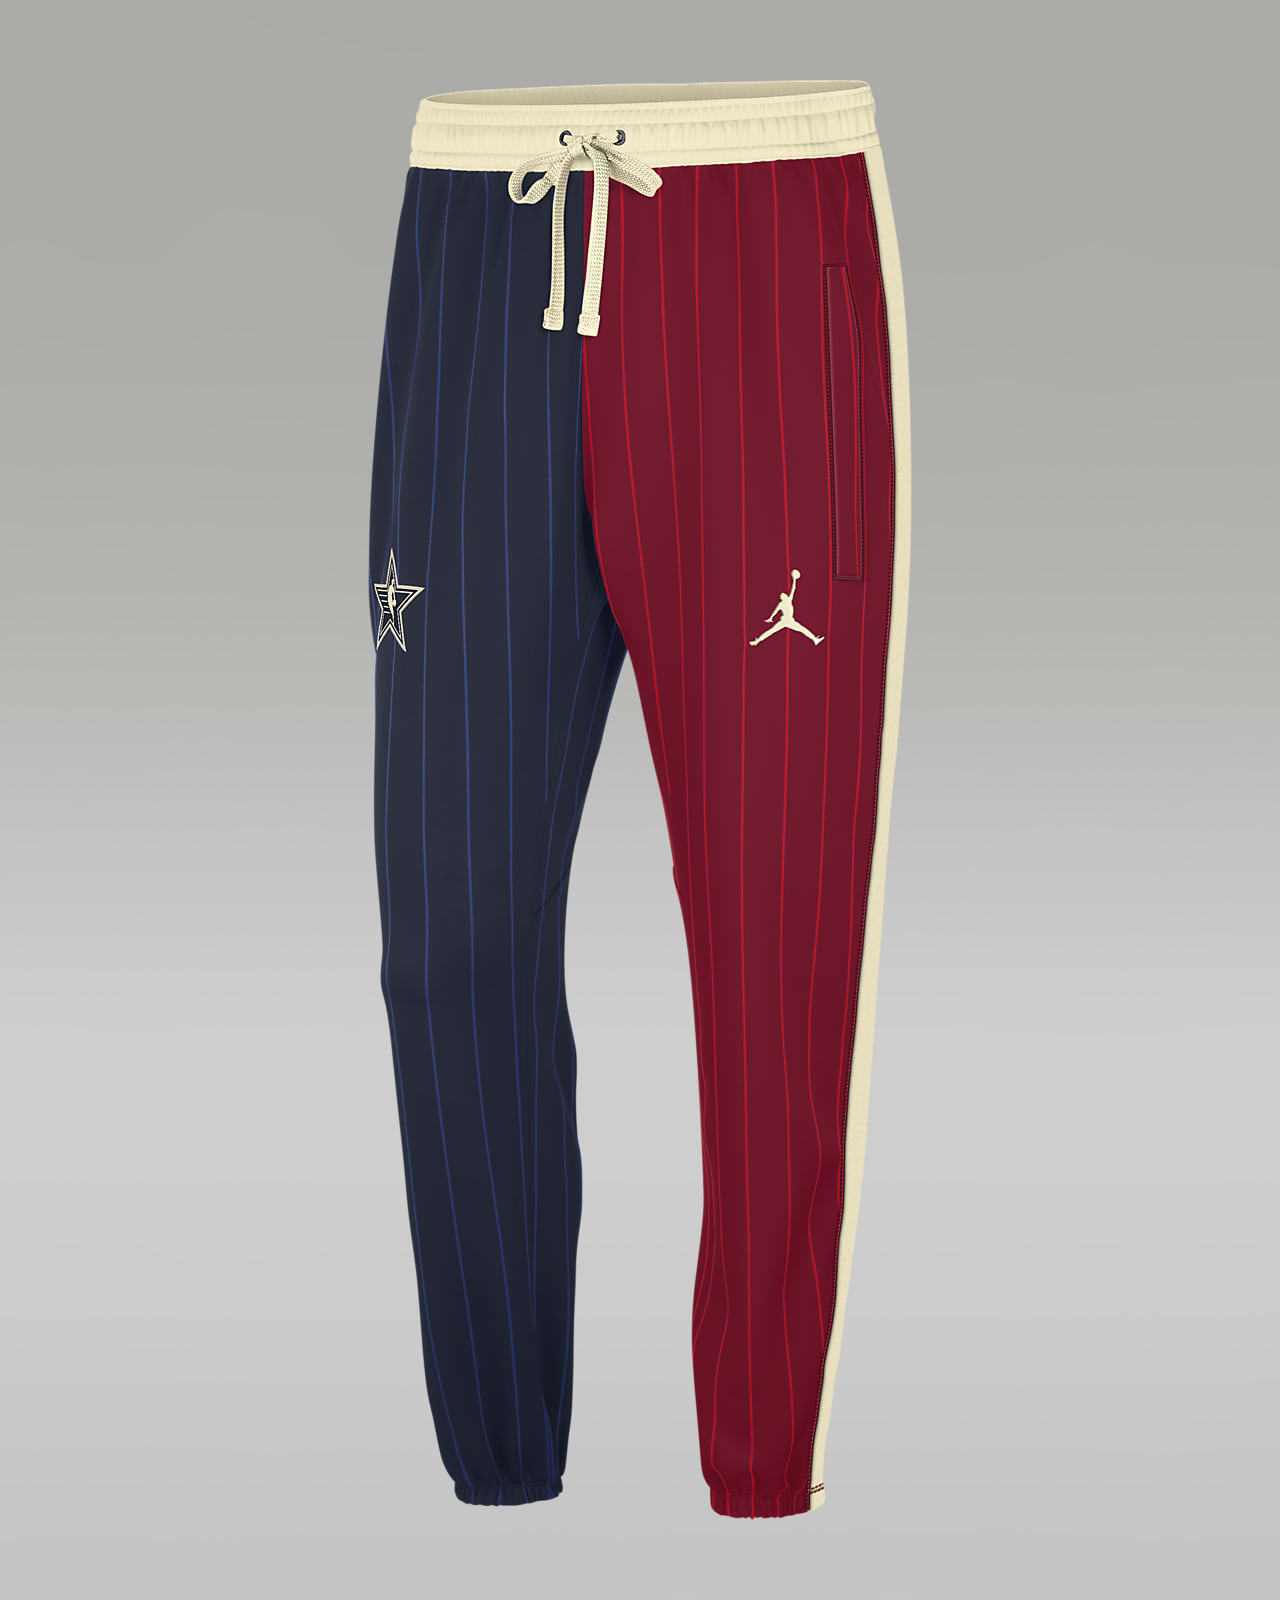 NBA All-Star Collection Nike Pro Tight Pants & Tights.